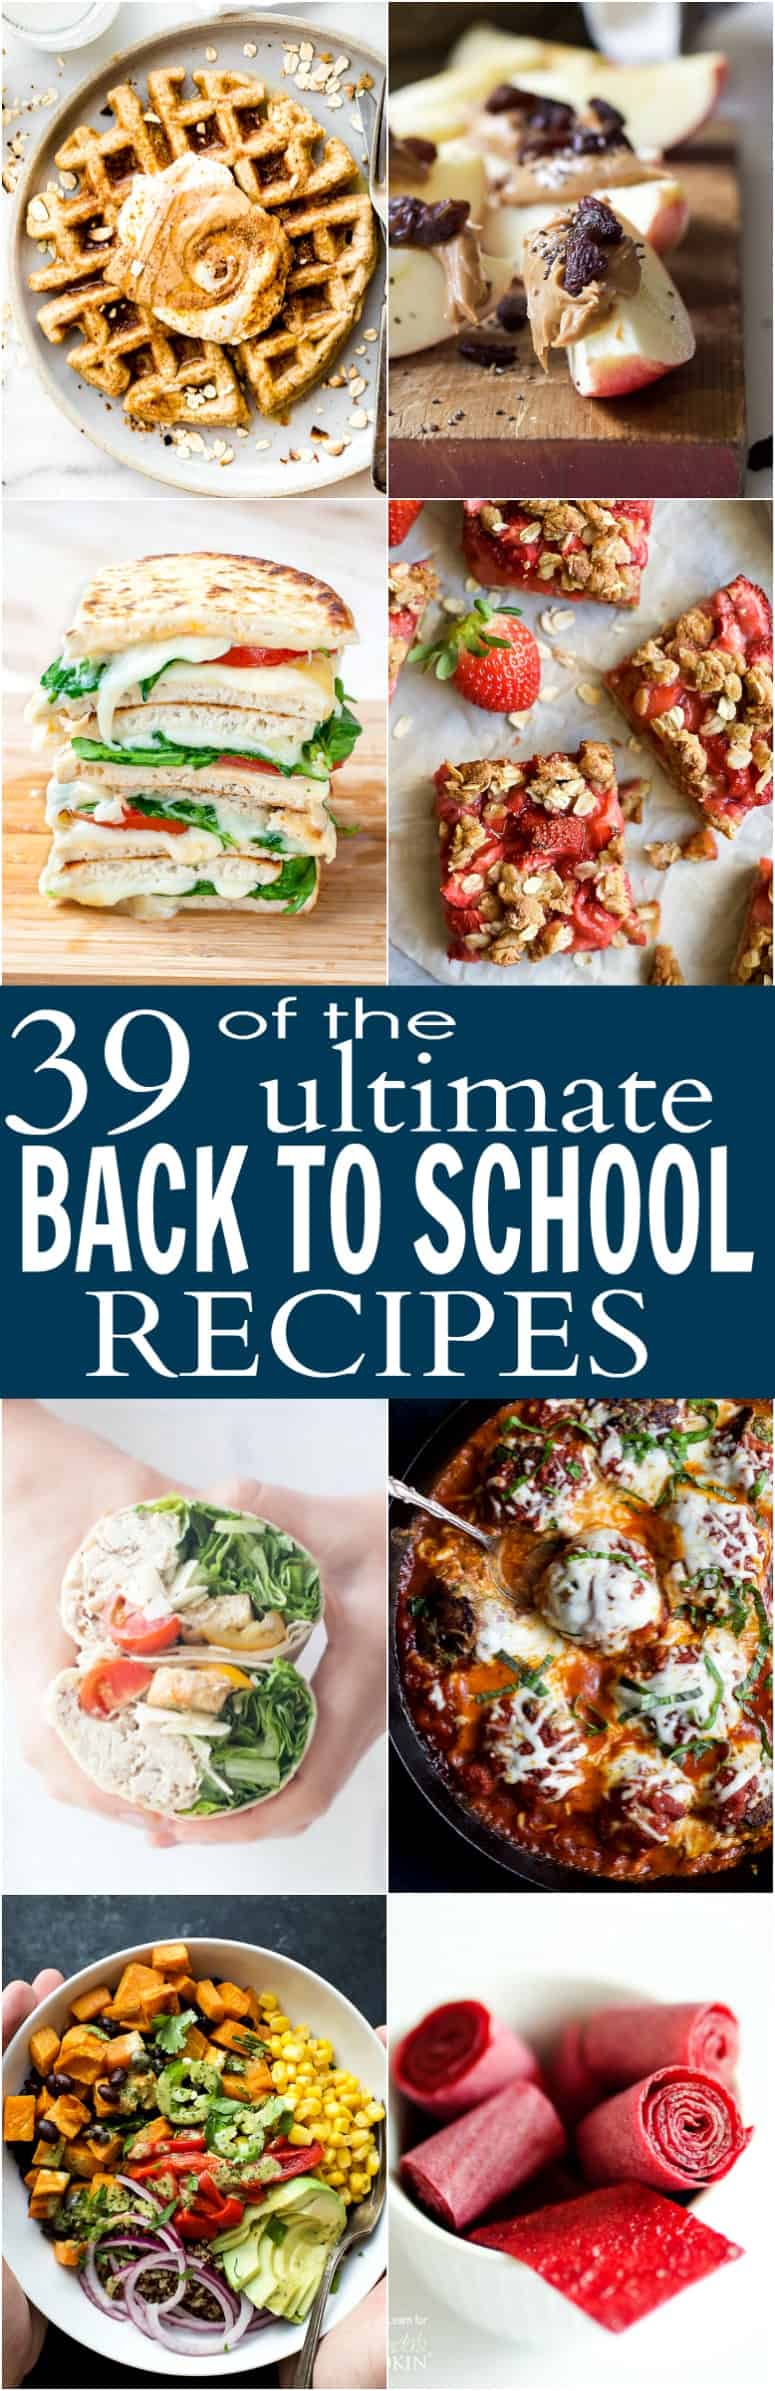 39 of the Ultimate Back to School Recipes - from breakfast recipes, to snack, lunch and dinner. You're gonna love the easy recipes here to make back to school season a breeze!